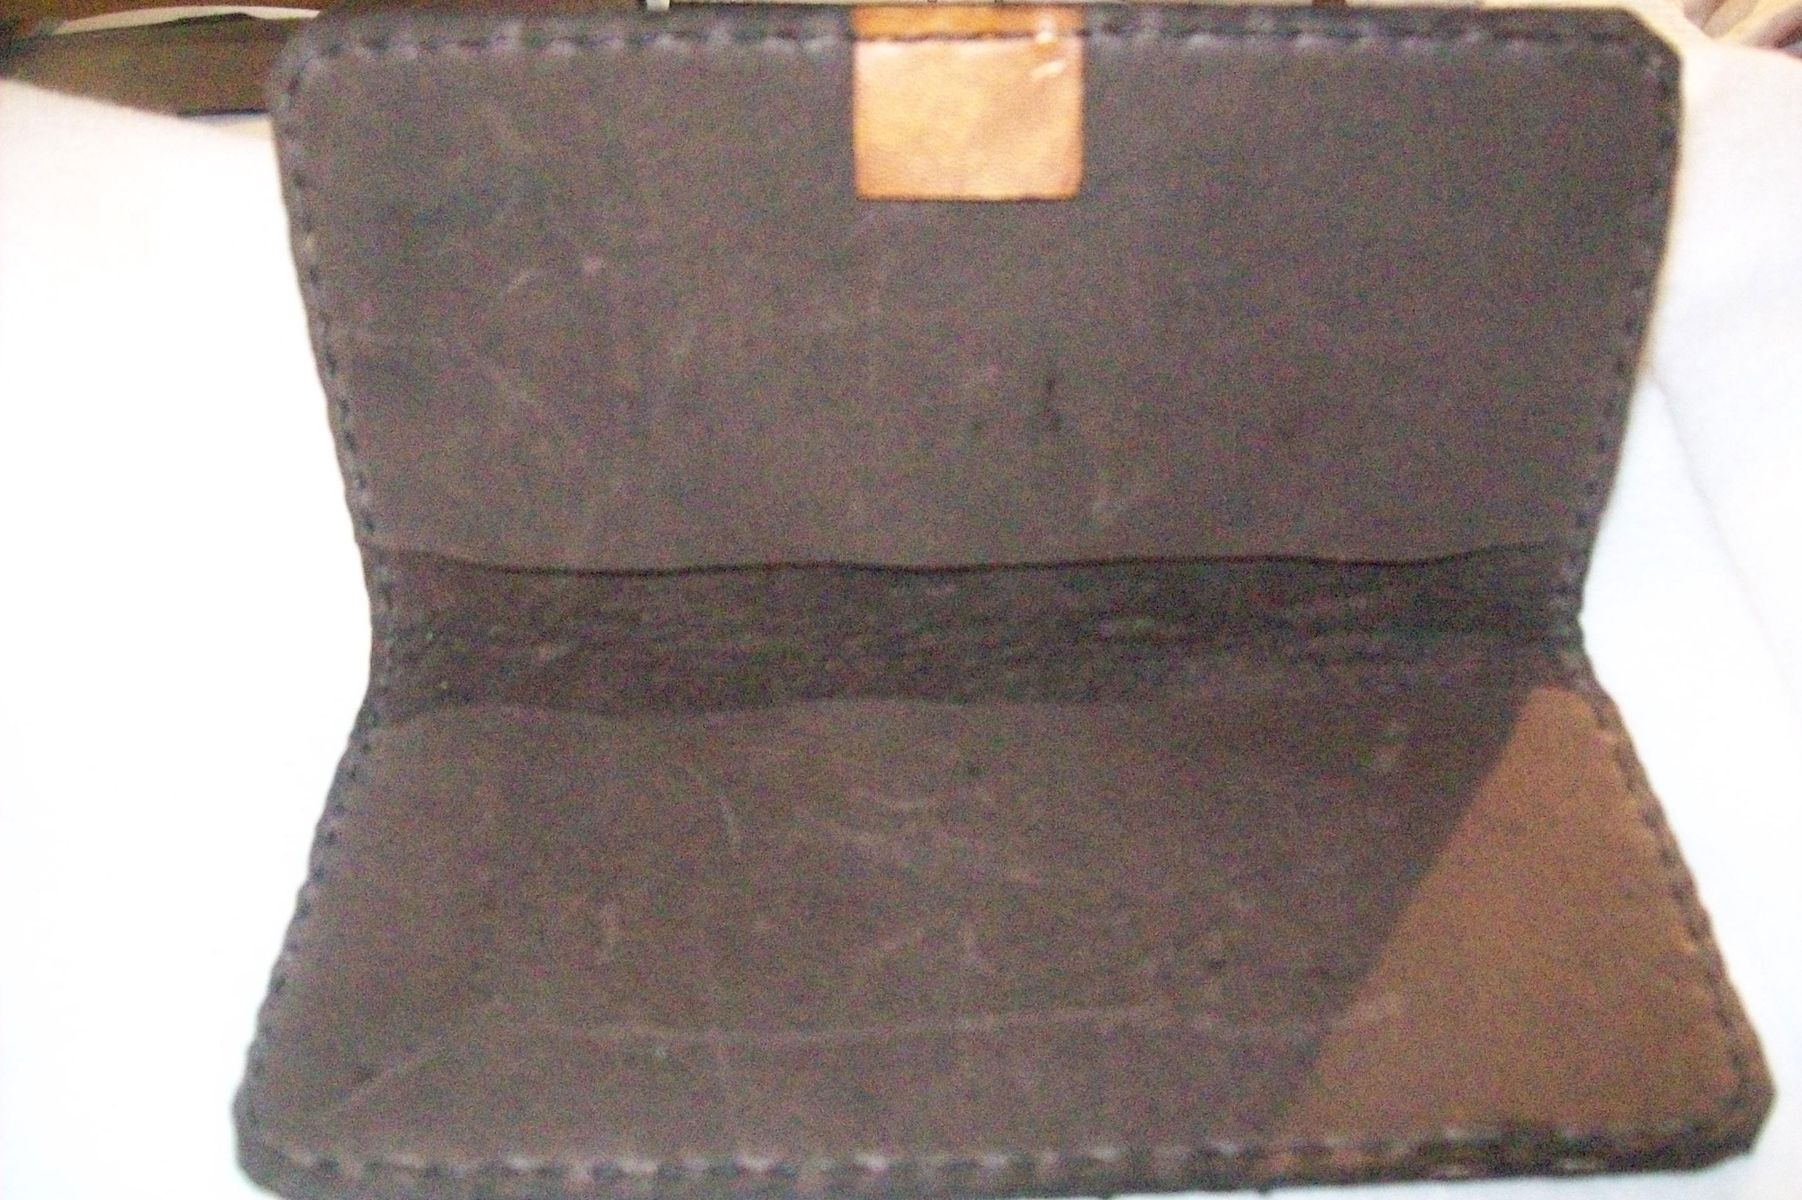 sale leather checkbook covers